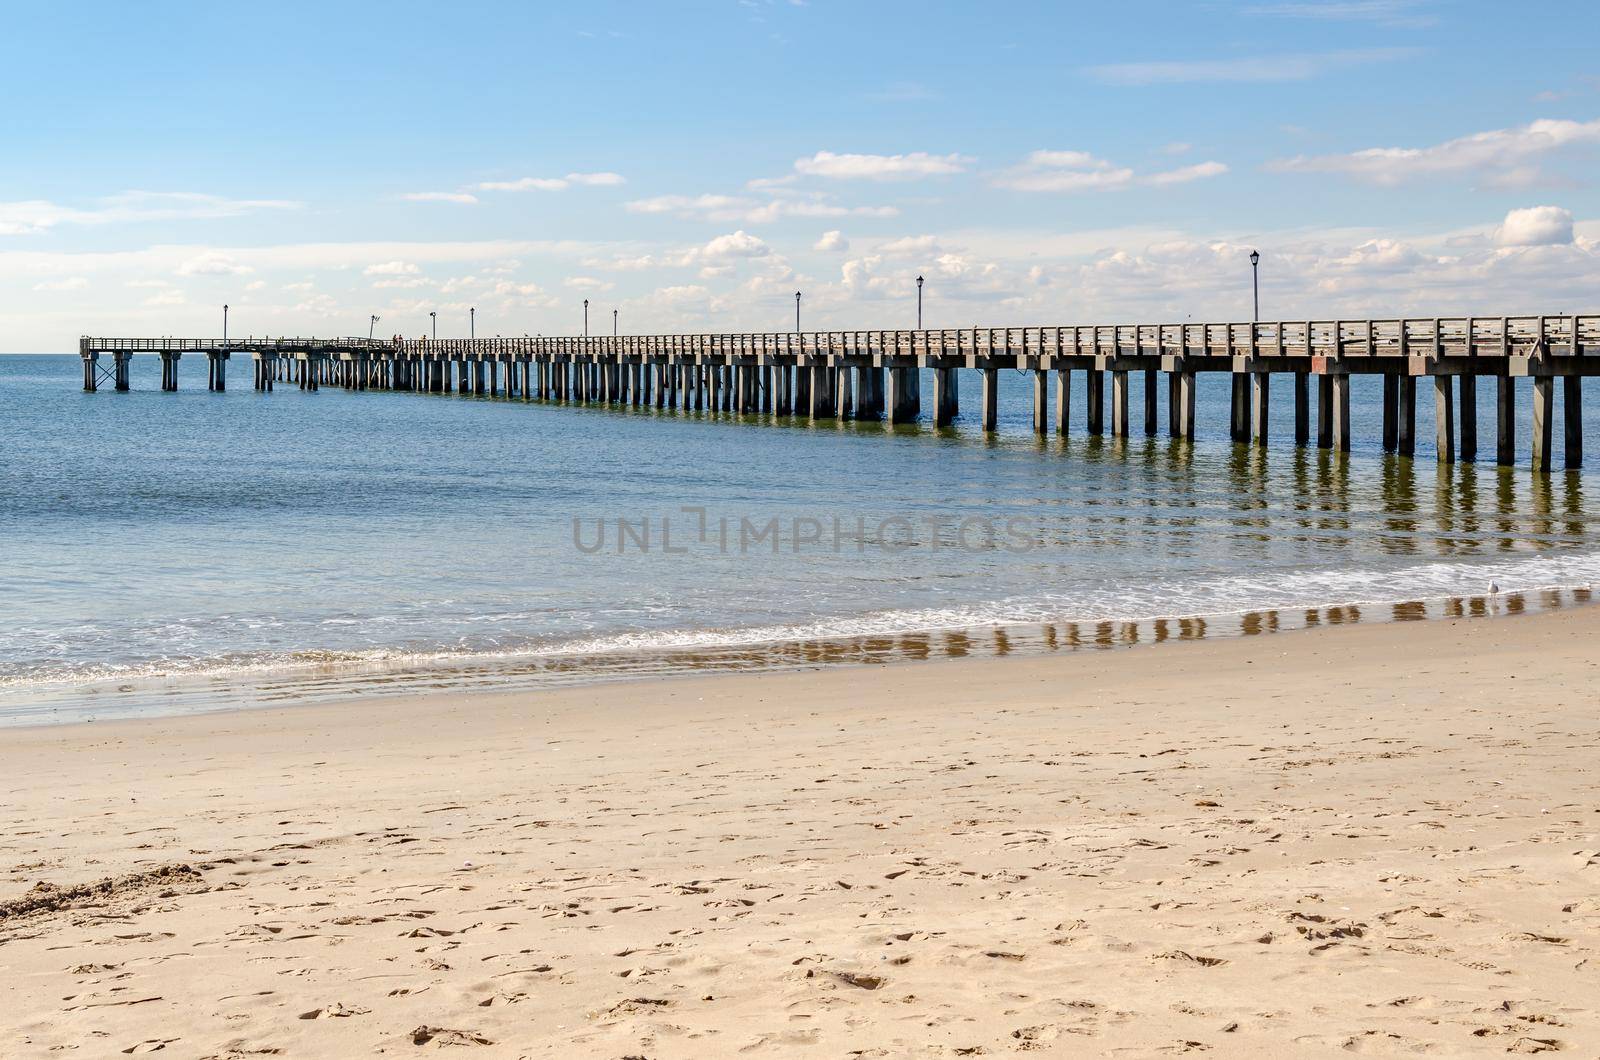 Pat Auletta Steeplechase Pier at Coney island Beach, view from the side, Brooklyn, New York City during winter day with almost clear sky, Ocean in the Background, horizontal